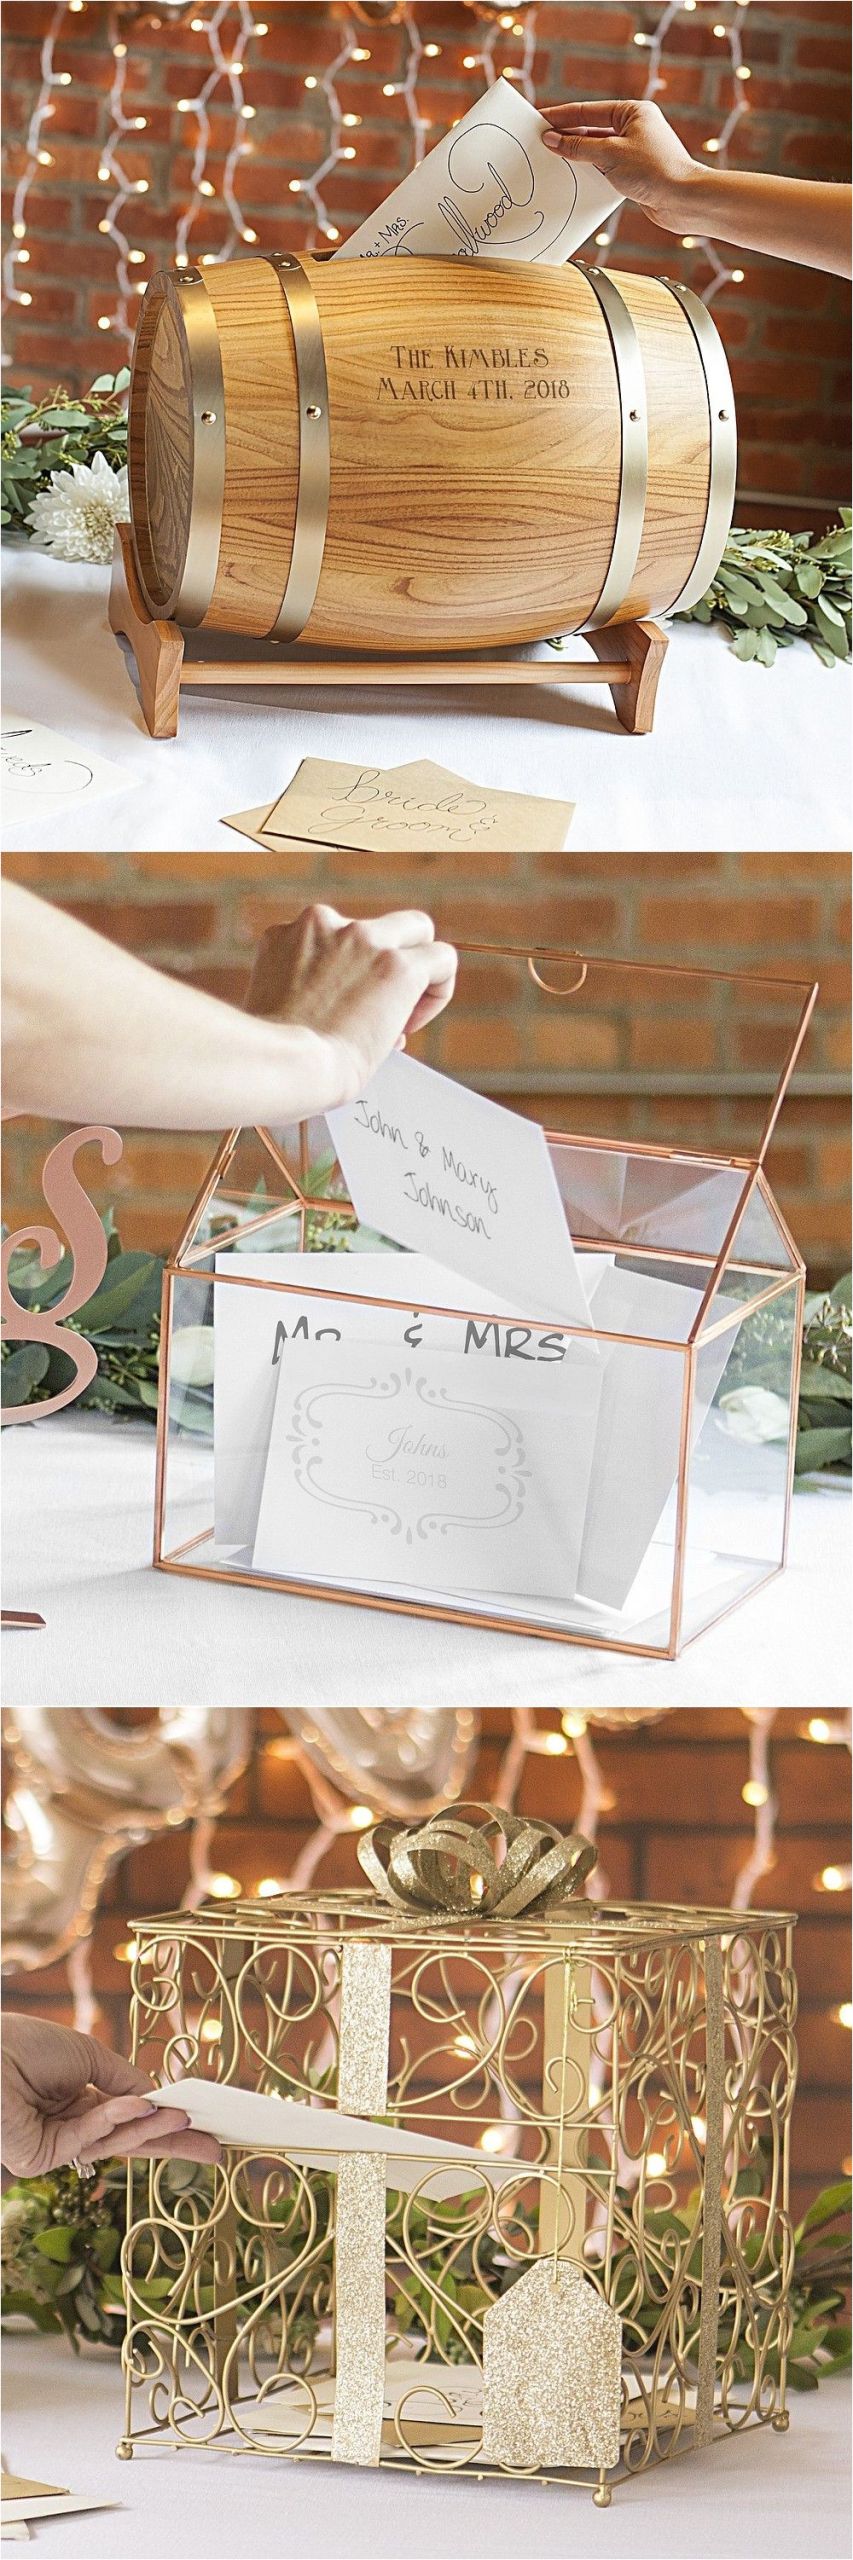 Card and Gift Holder Wedding 91 Best Gift Card Holder Ideas Images In 2020 Wedding